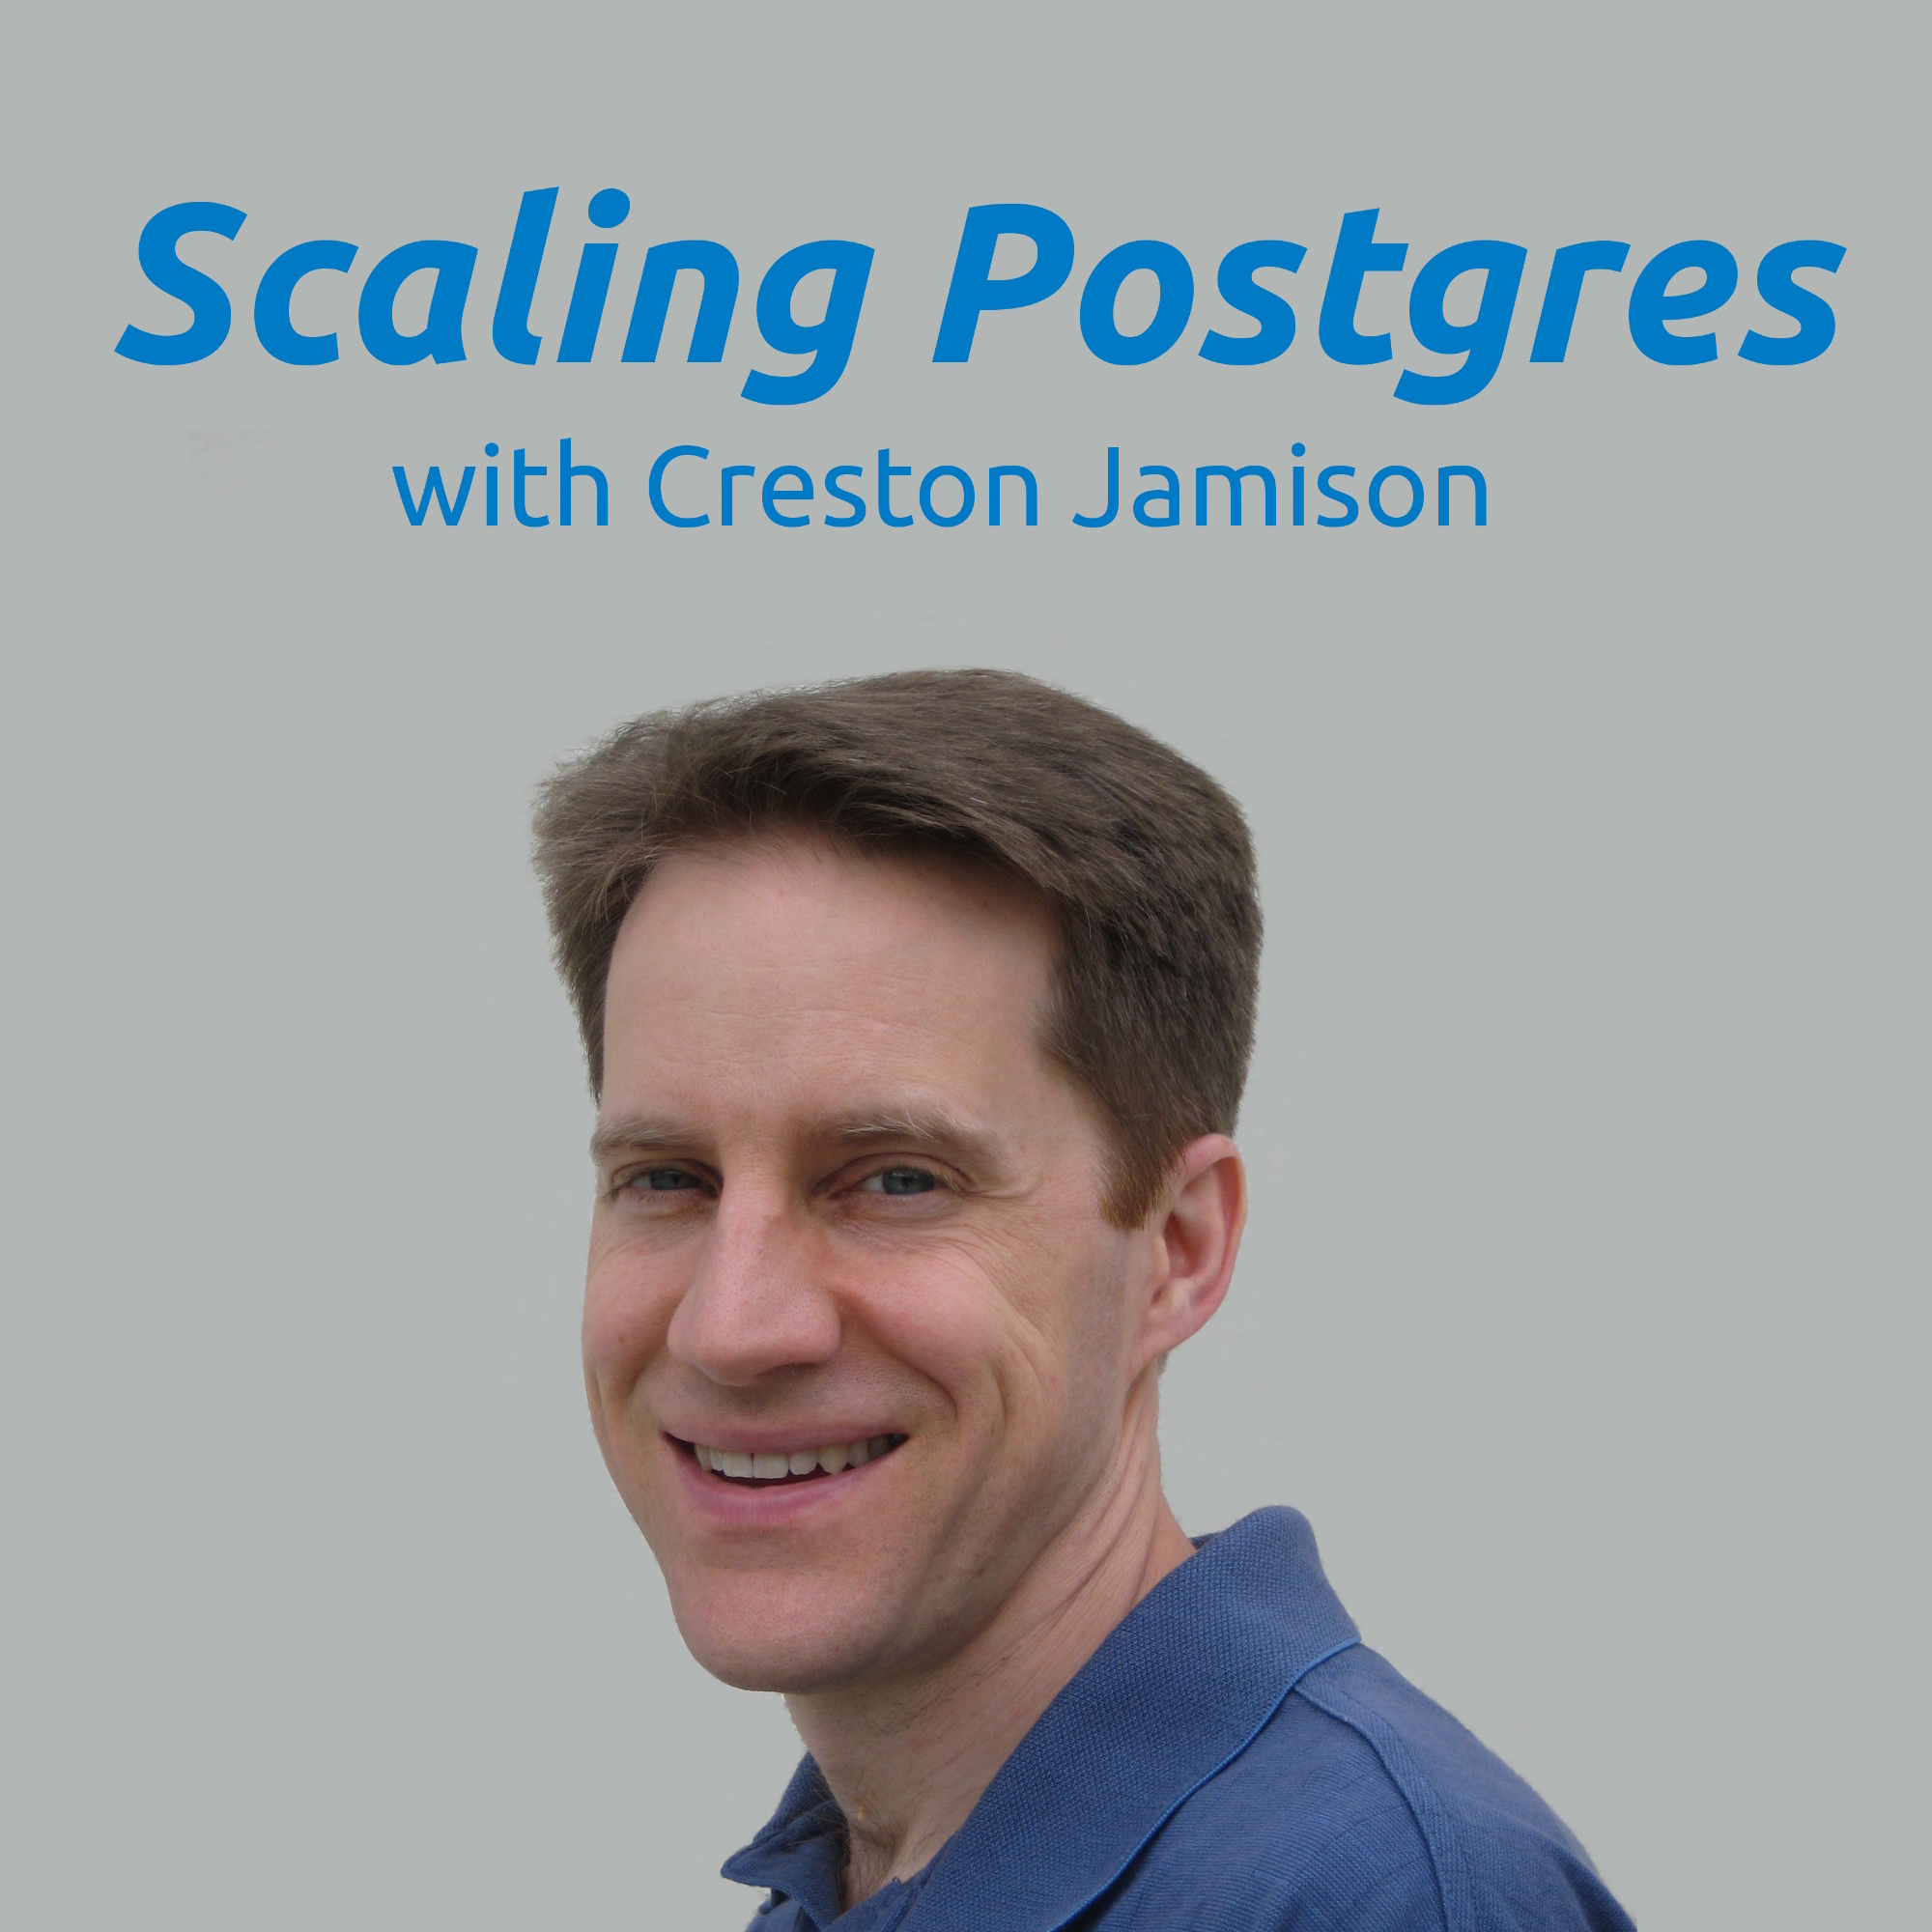 Postgres Releases, Postgres Distributed, Privilege Template, Real-Time Dashboards | Scaling Postgres 266